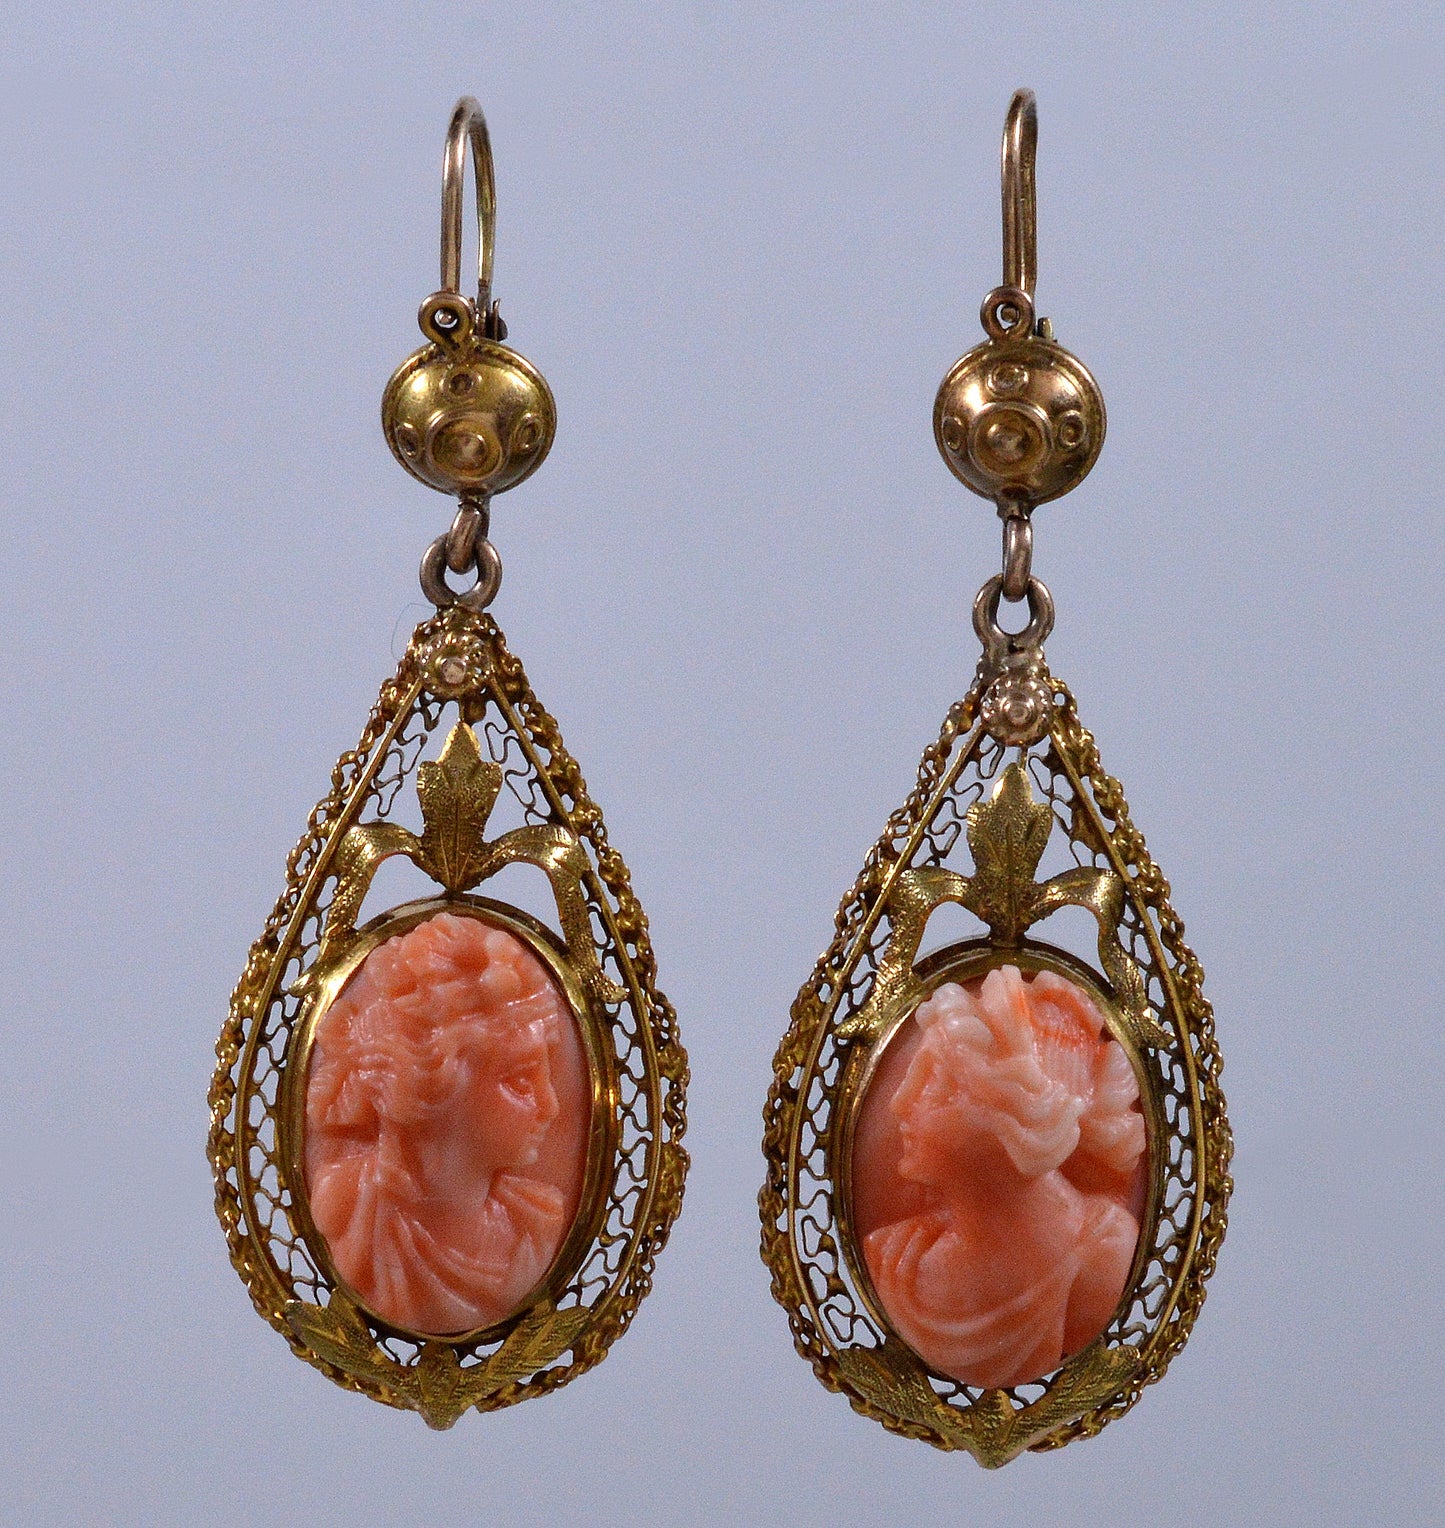 Antique Victorian 14K Gold Coral Cameo Earrings C.1840